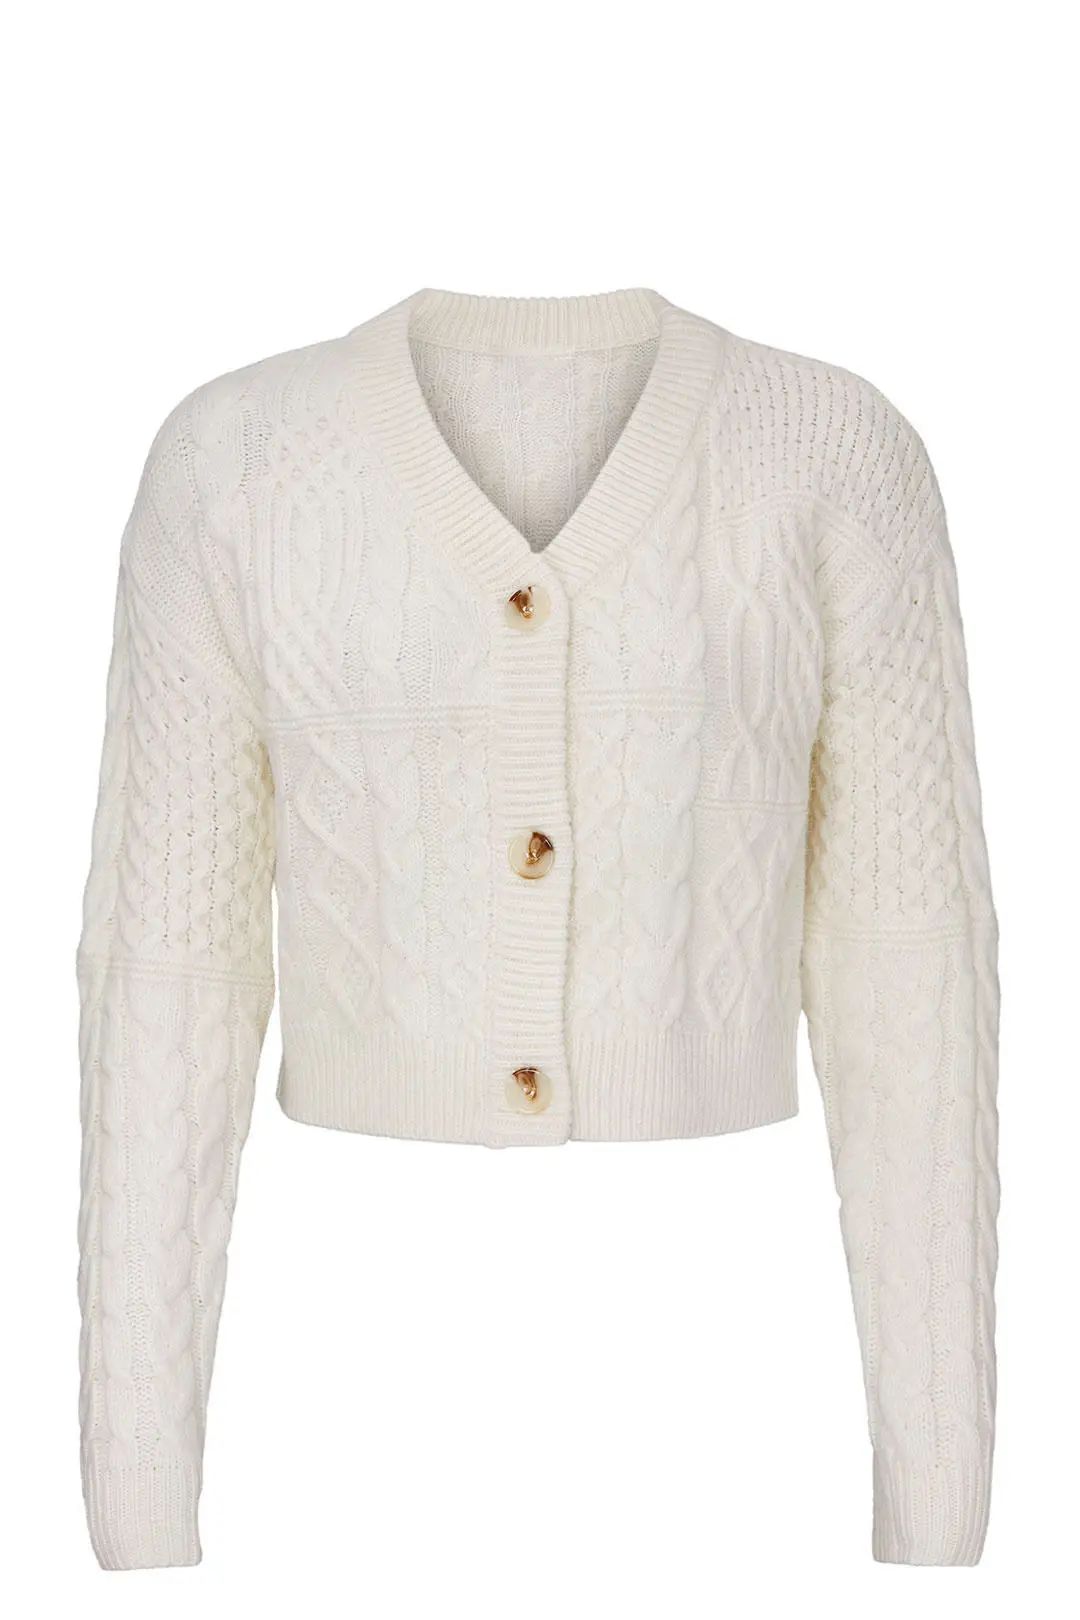 VOX LUX Ivory Mix Cable Cardigan | Rent The Runway